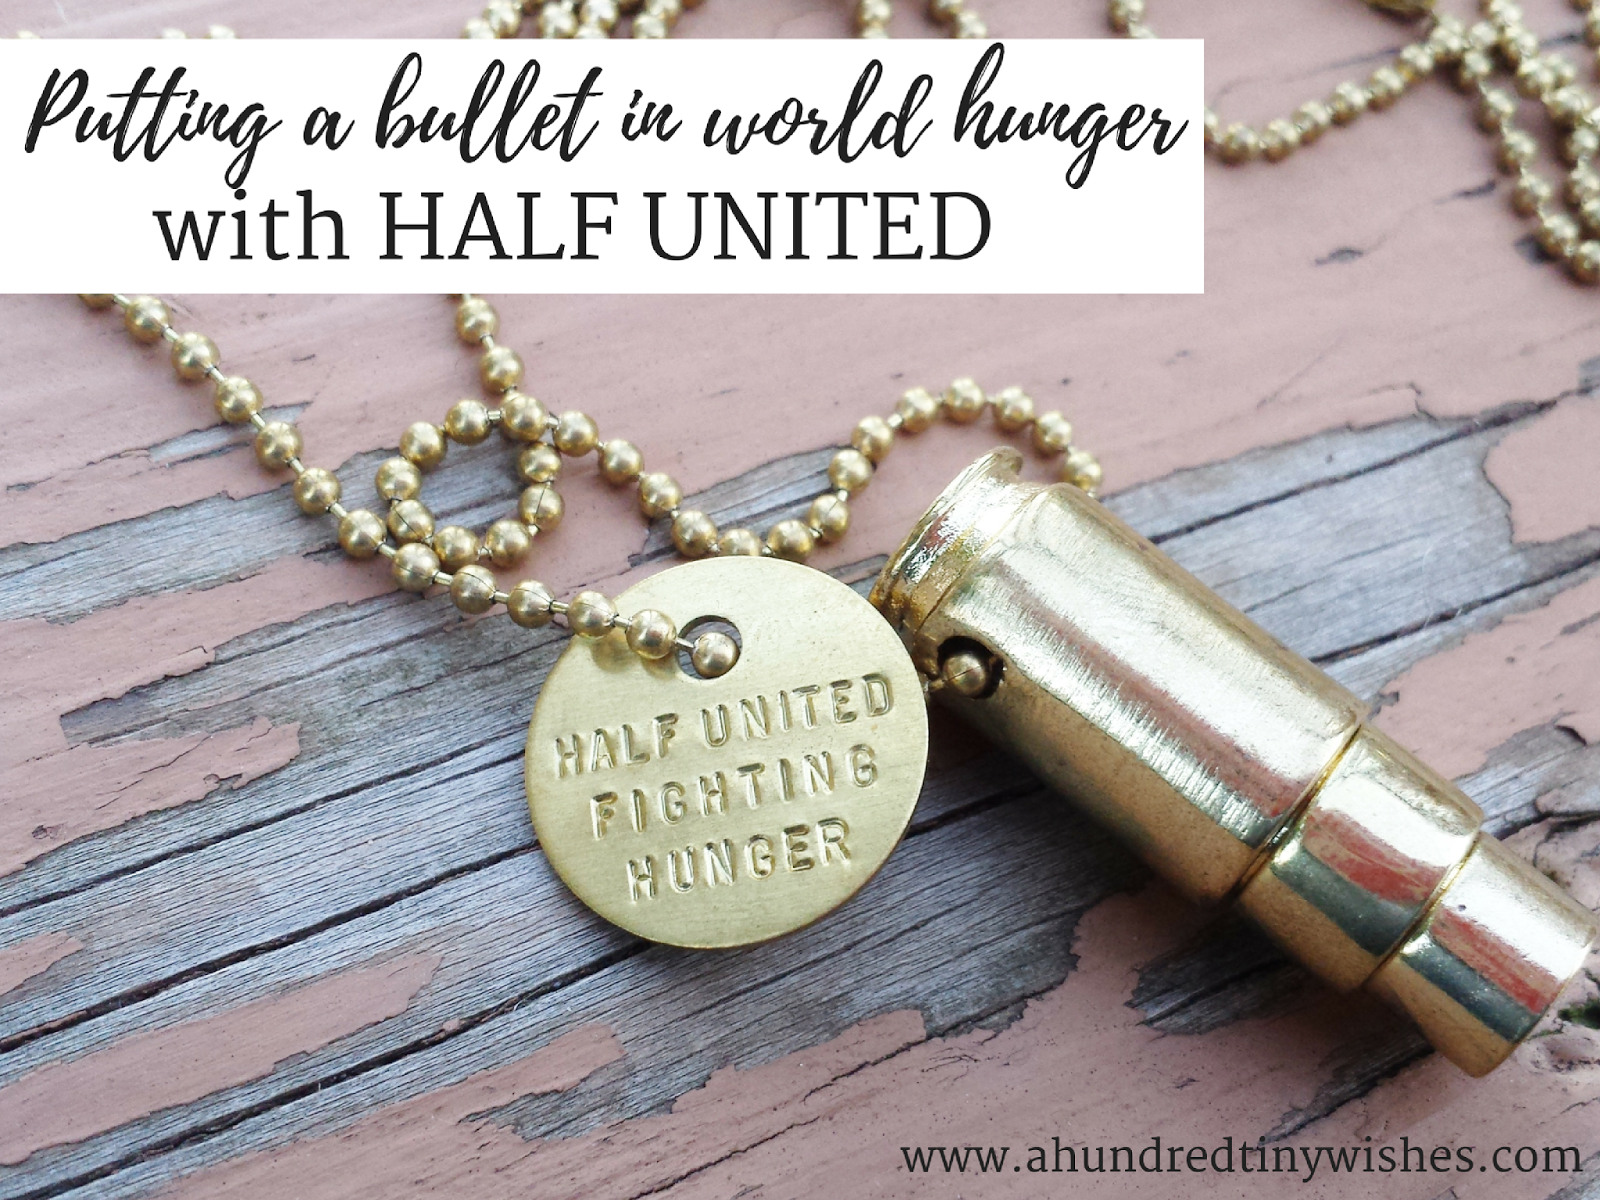 "Fighting Hunger" bullet necklace